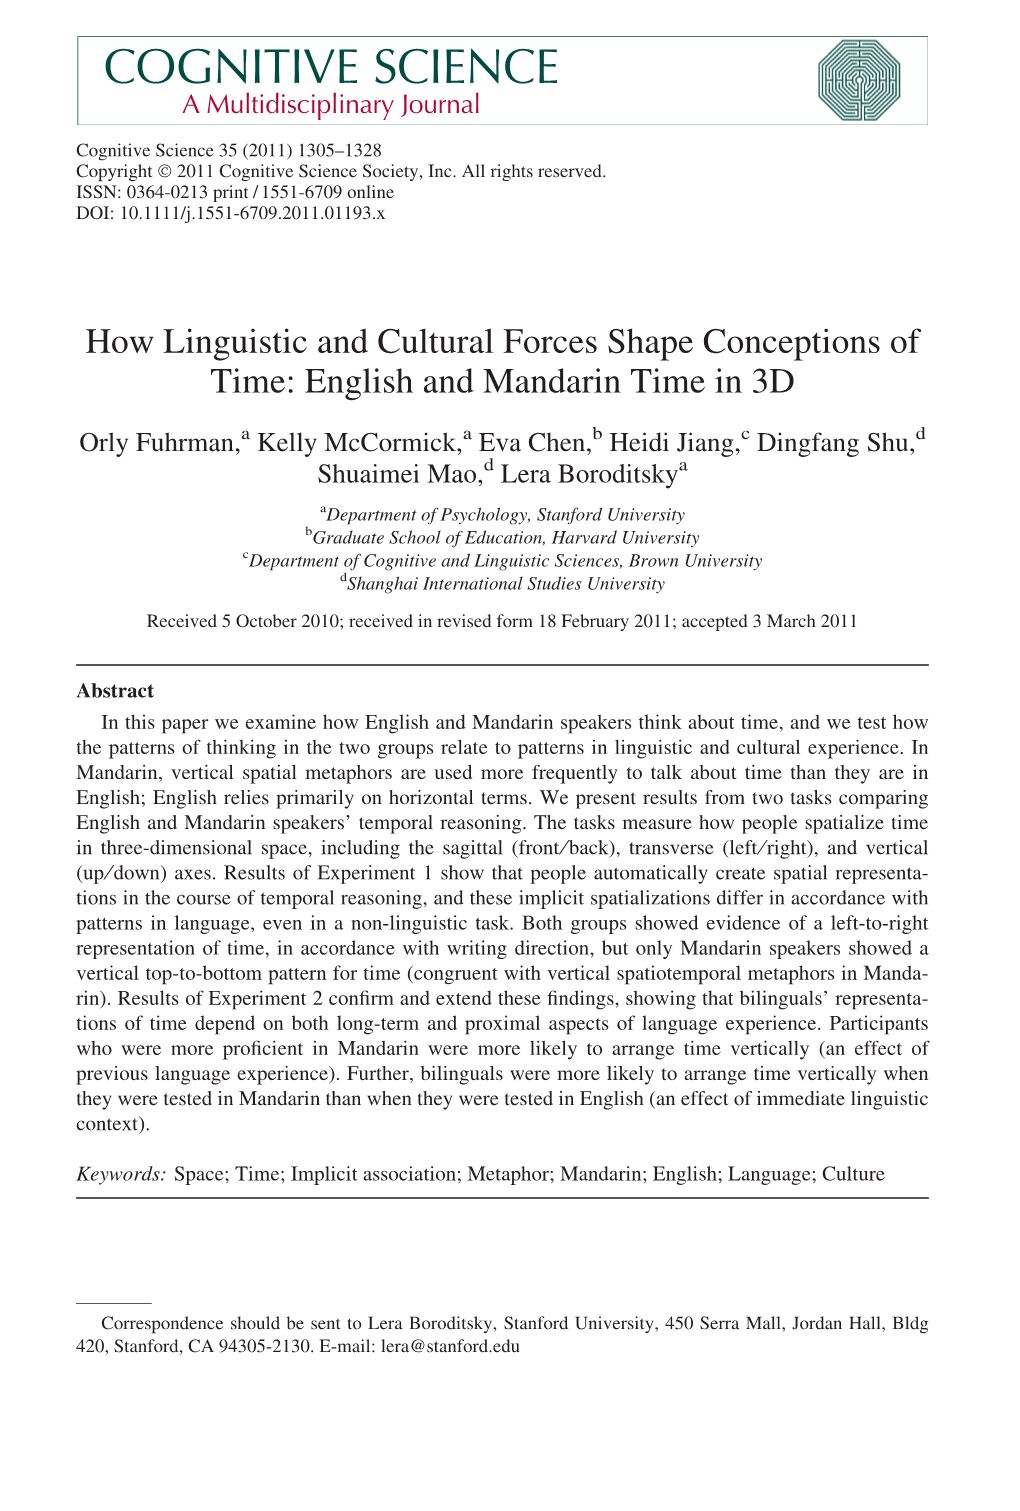 How Linguistic and Cultural Forces Shape Conceptions of Time: English and Mandarin Time in 3D